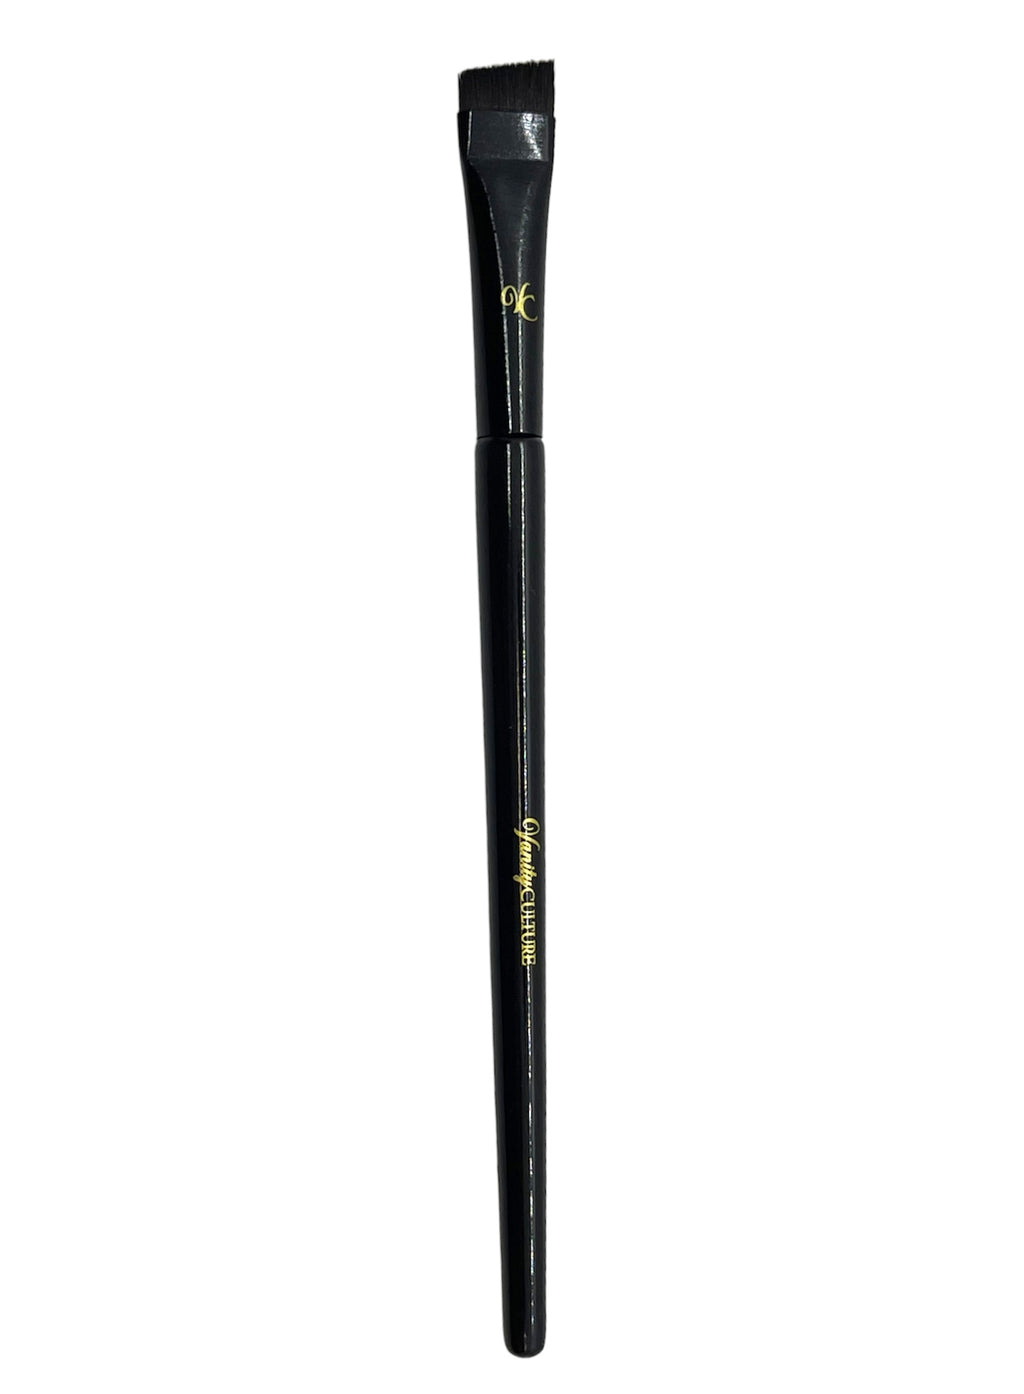 Brow Rescue Pro - Ultra Flat, (Large) Angeled Definer Brush